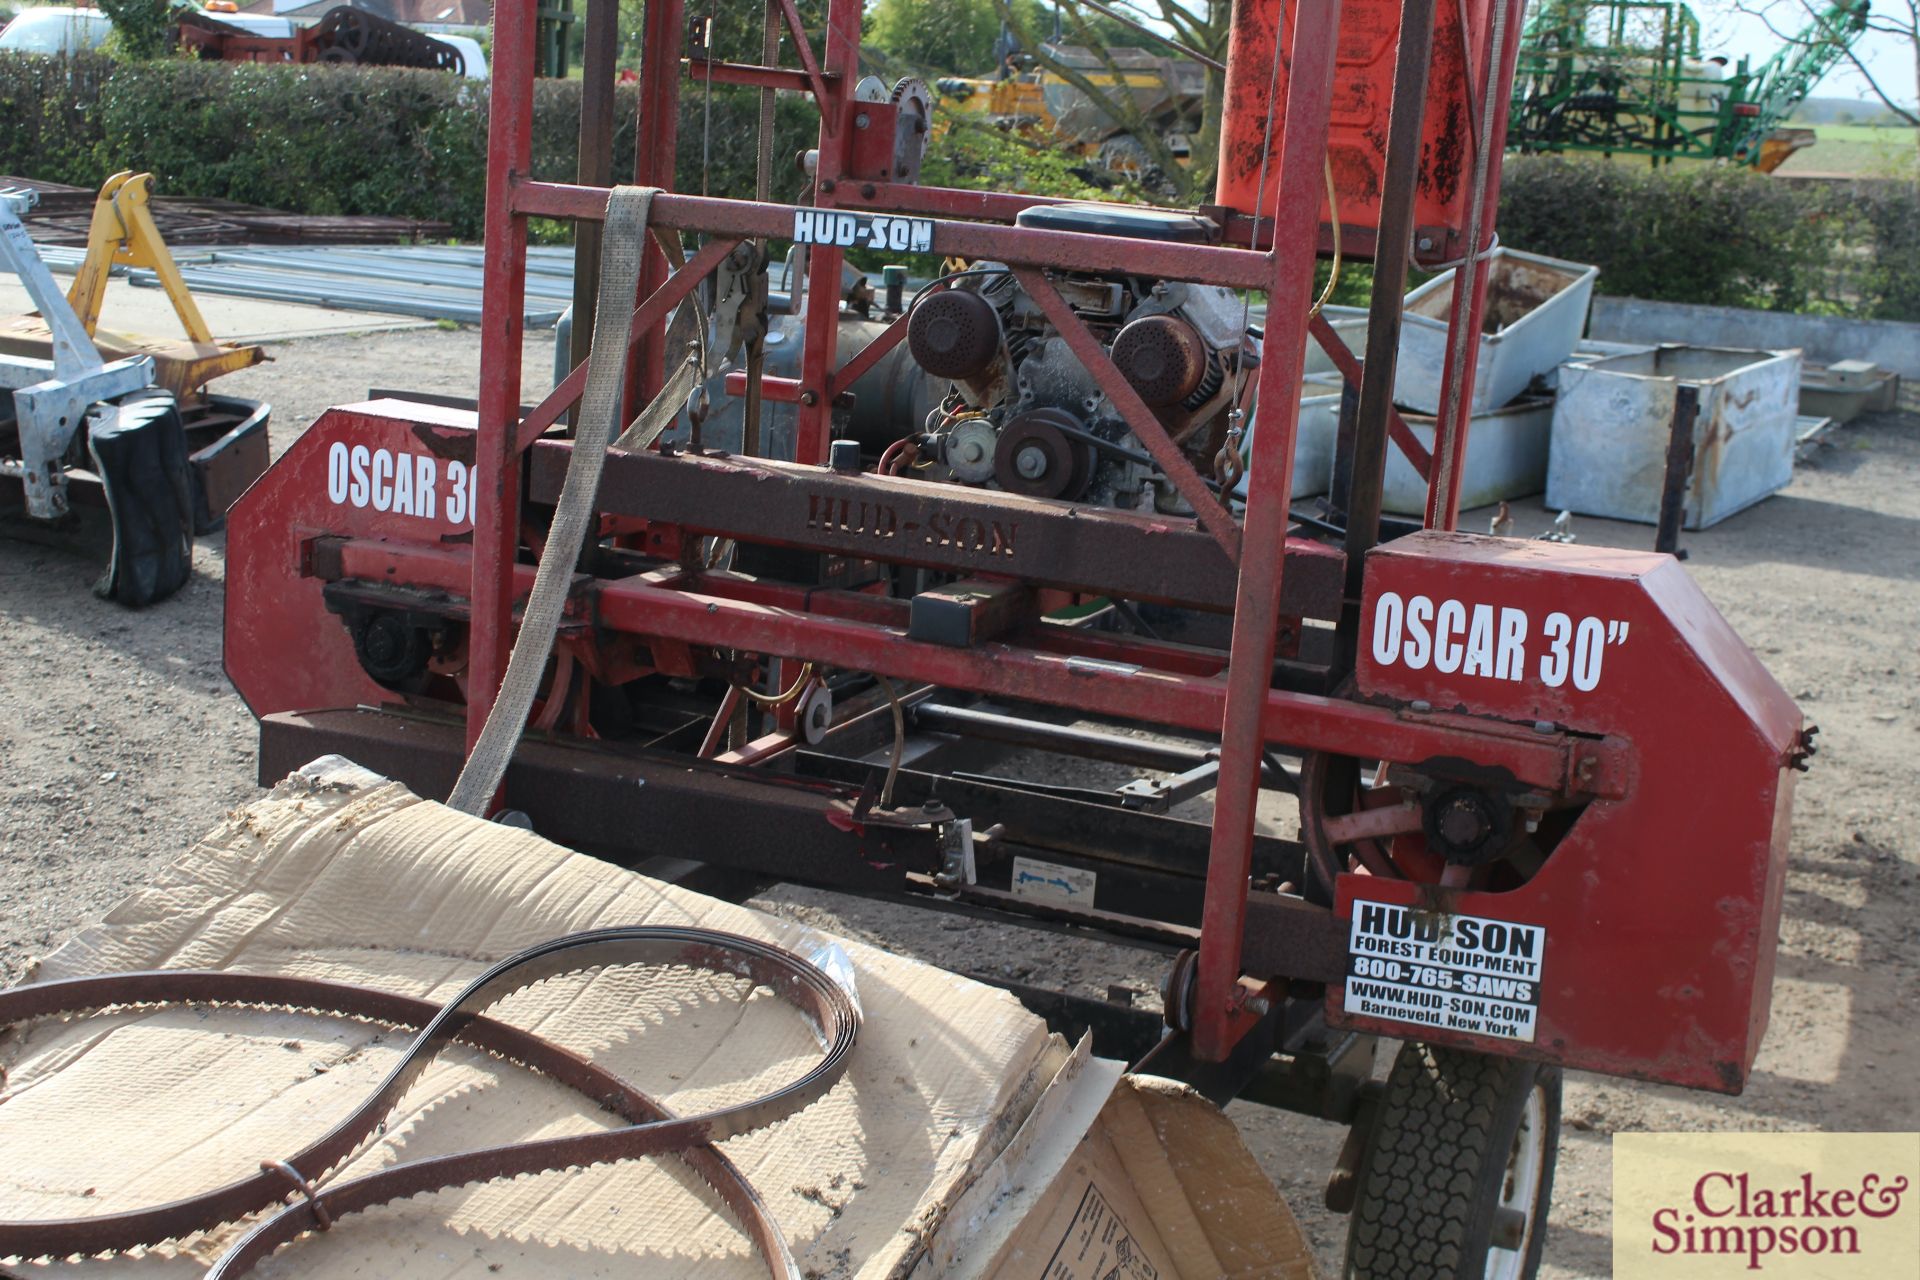 Hud-Son Oscar 30in portable trailer mounted saw mill. With Vanguard V-twin petrol engine. - Image 6 of 14